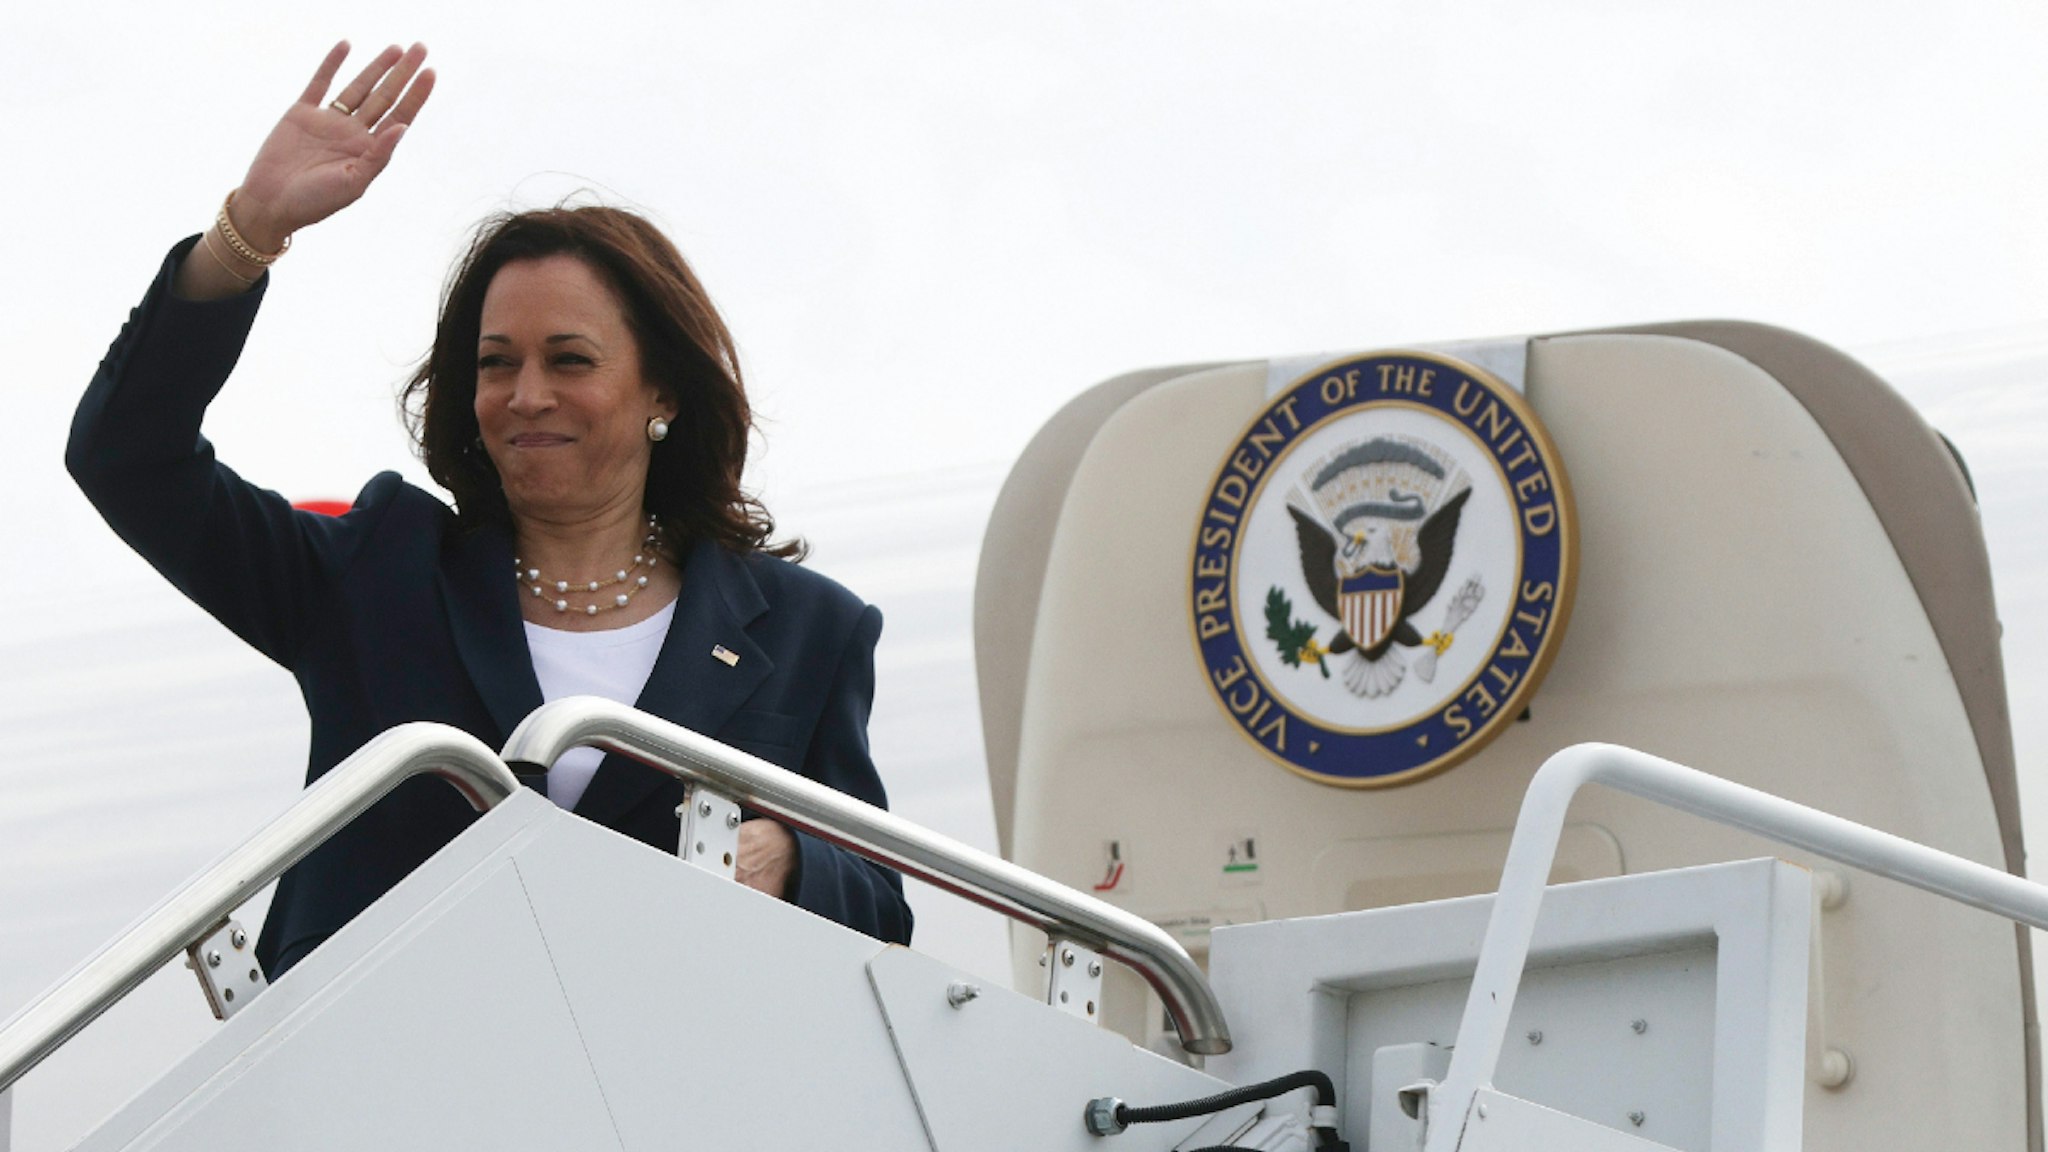 JOINT BASE ANDREWS, MARYLAND - JUNE 14: U.S. Vice President Kamala Harris waves as she boards Air Force Two June 14, 2021 in Joint Base Andrews, Maryland. Vice President Harris is traveling to Greenville, South Carolina, as part of a nationwide tour to encourage people to get vaccinated and highlight the administration's Covid vaccination efforts and initiatives